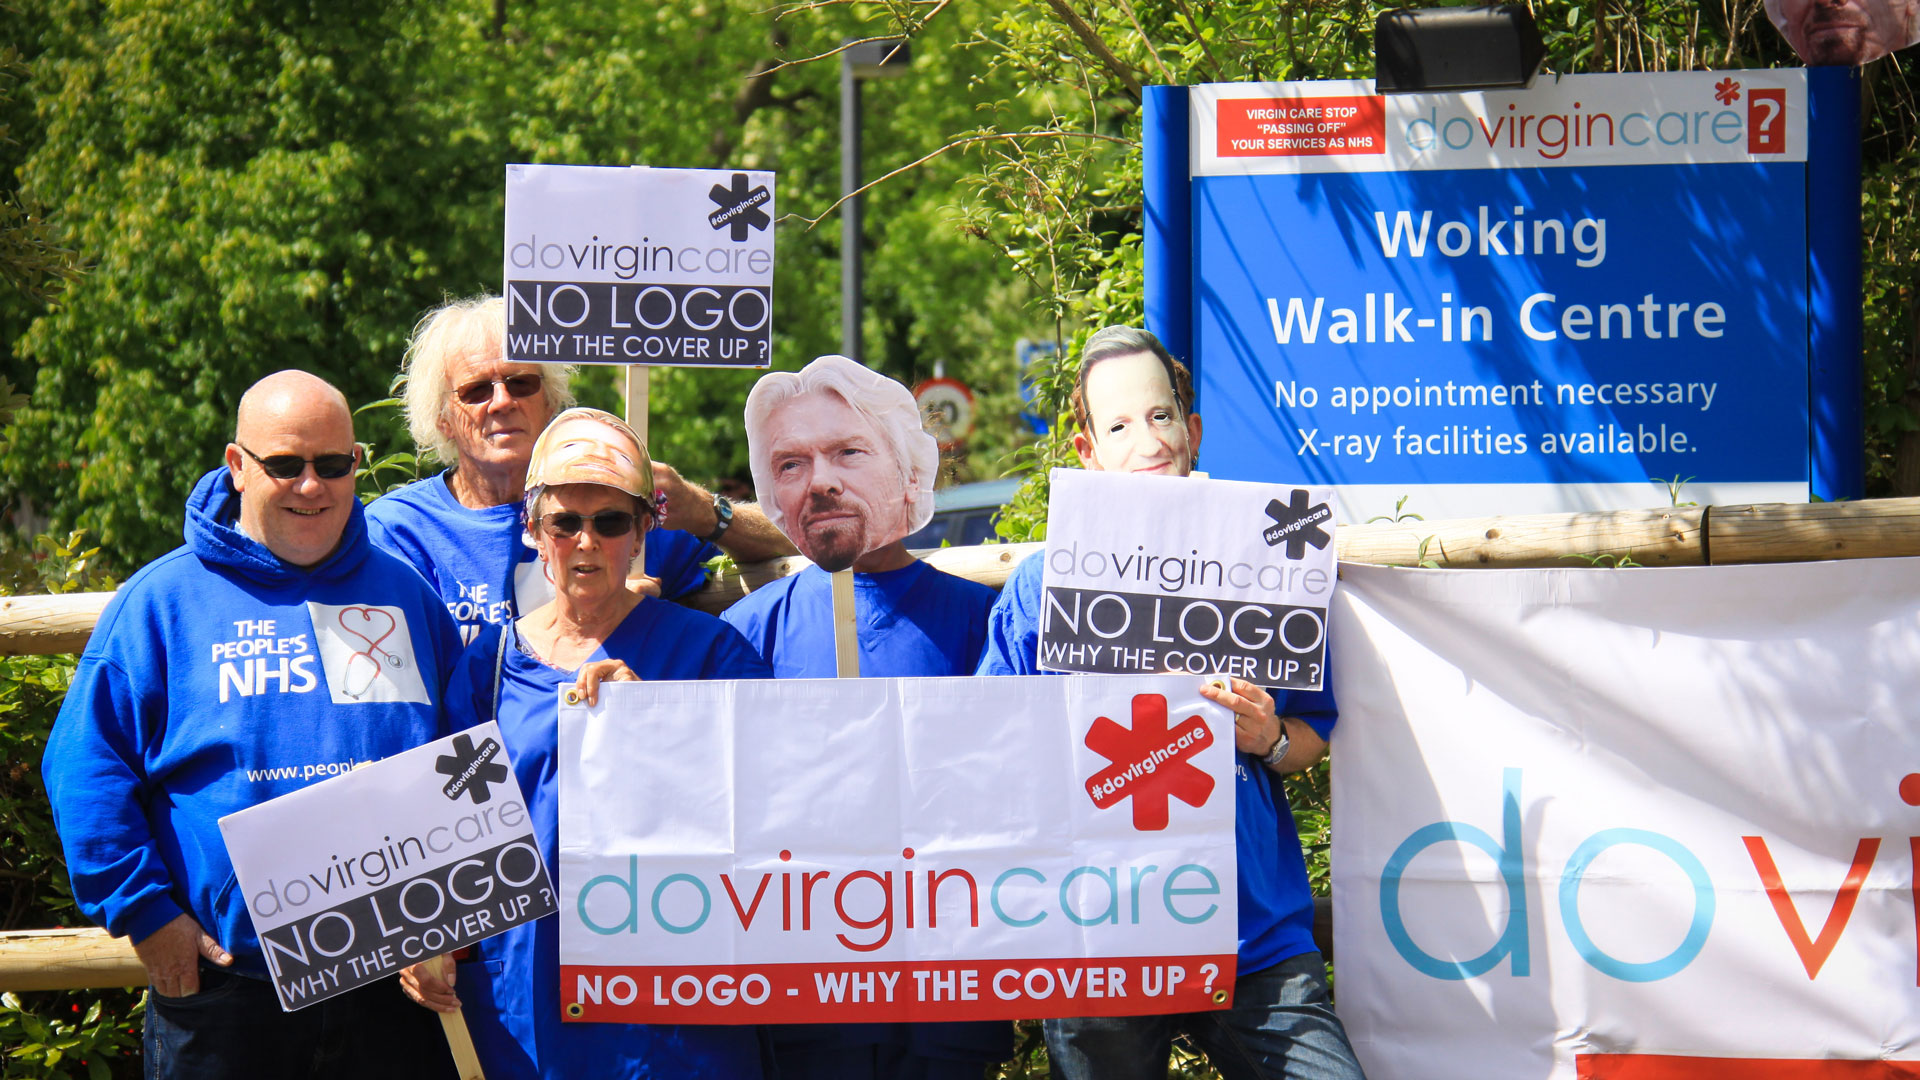 NHS workers protest with placards that say 'Do Virgin Care'